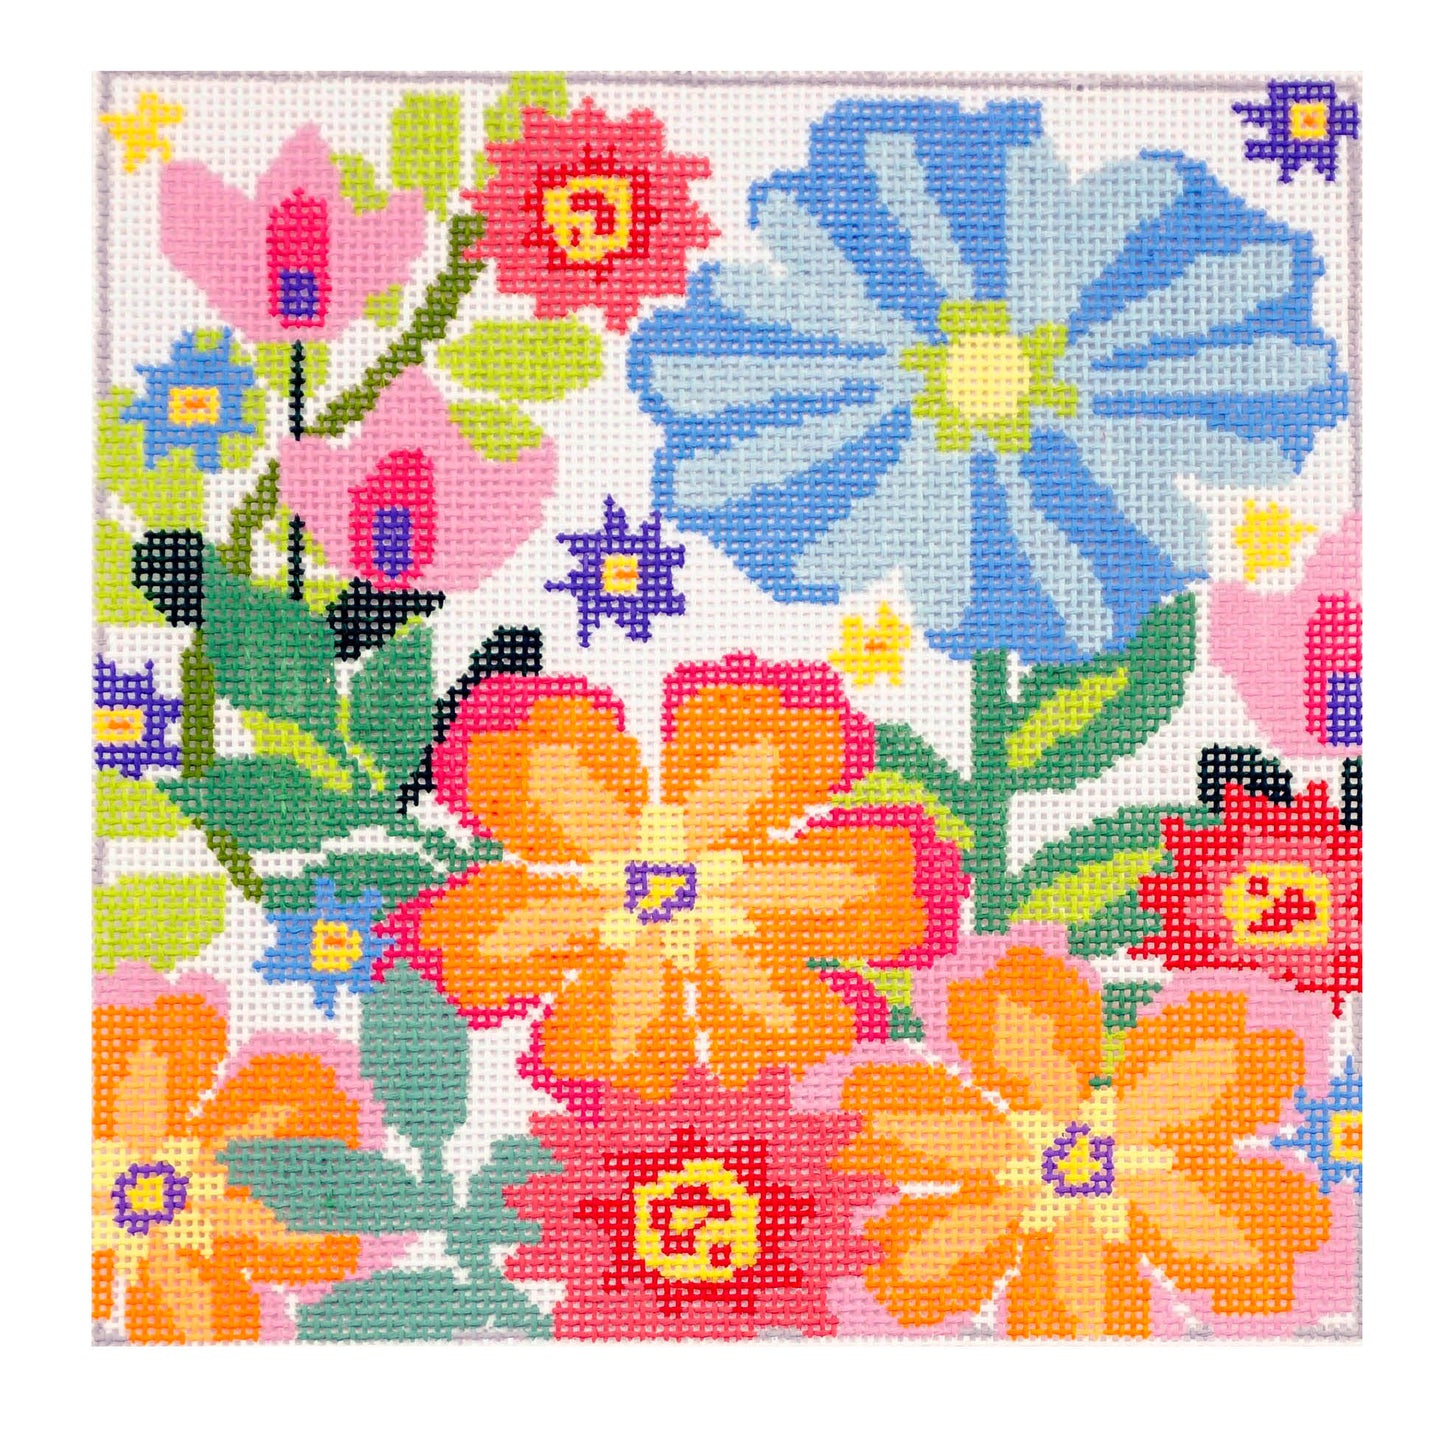 Fantasy Garden #4 ~ 8" Square handpainted Design on 13 mesh Needlepoint Canvas by Jean Smith